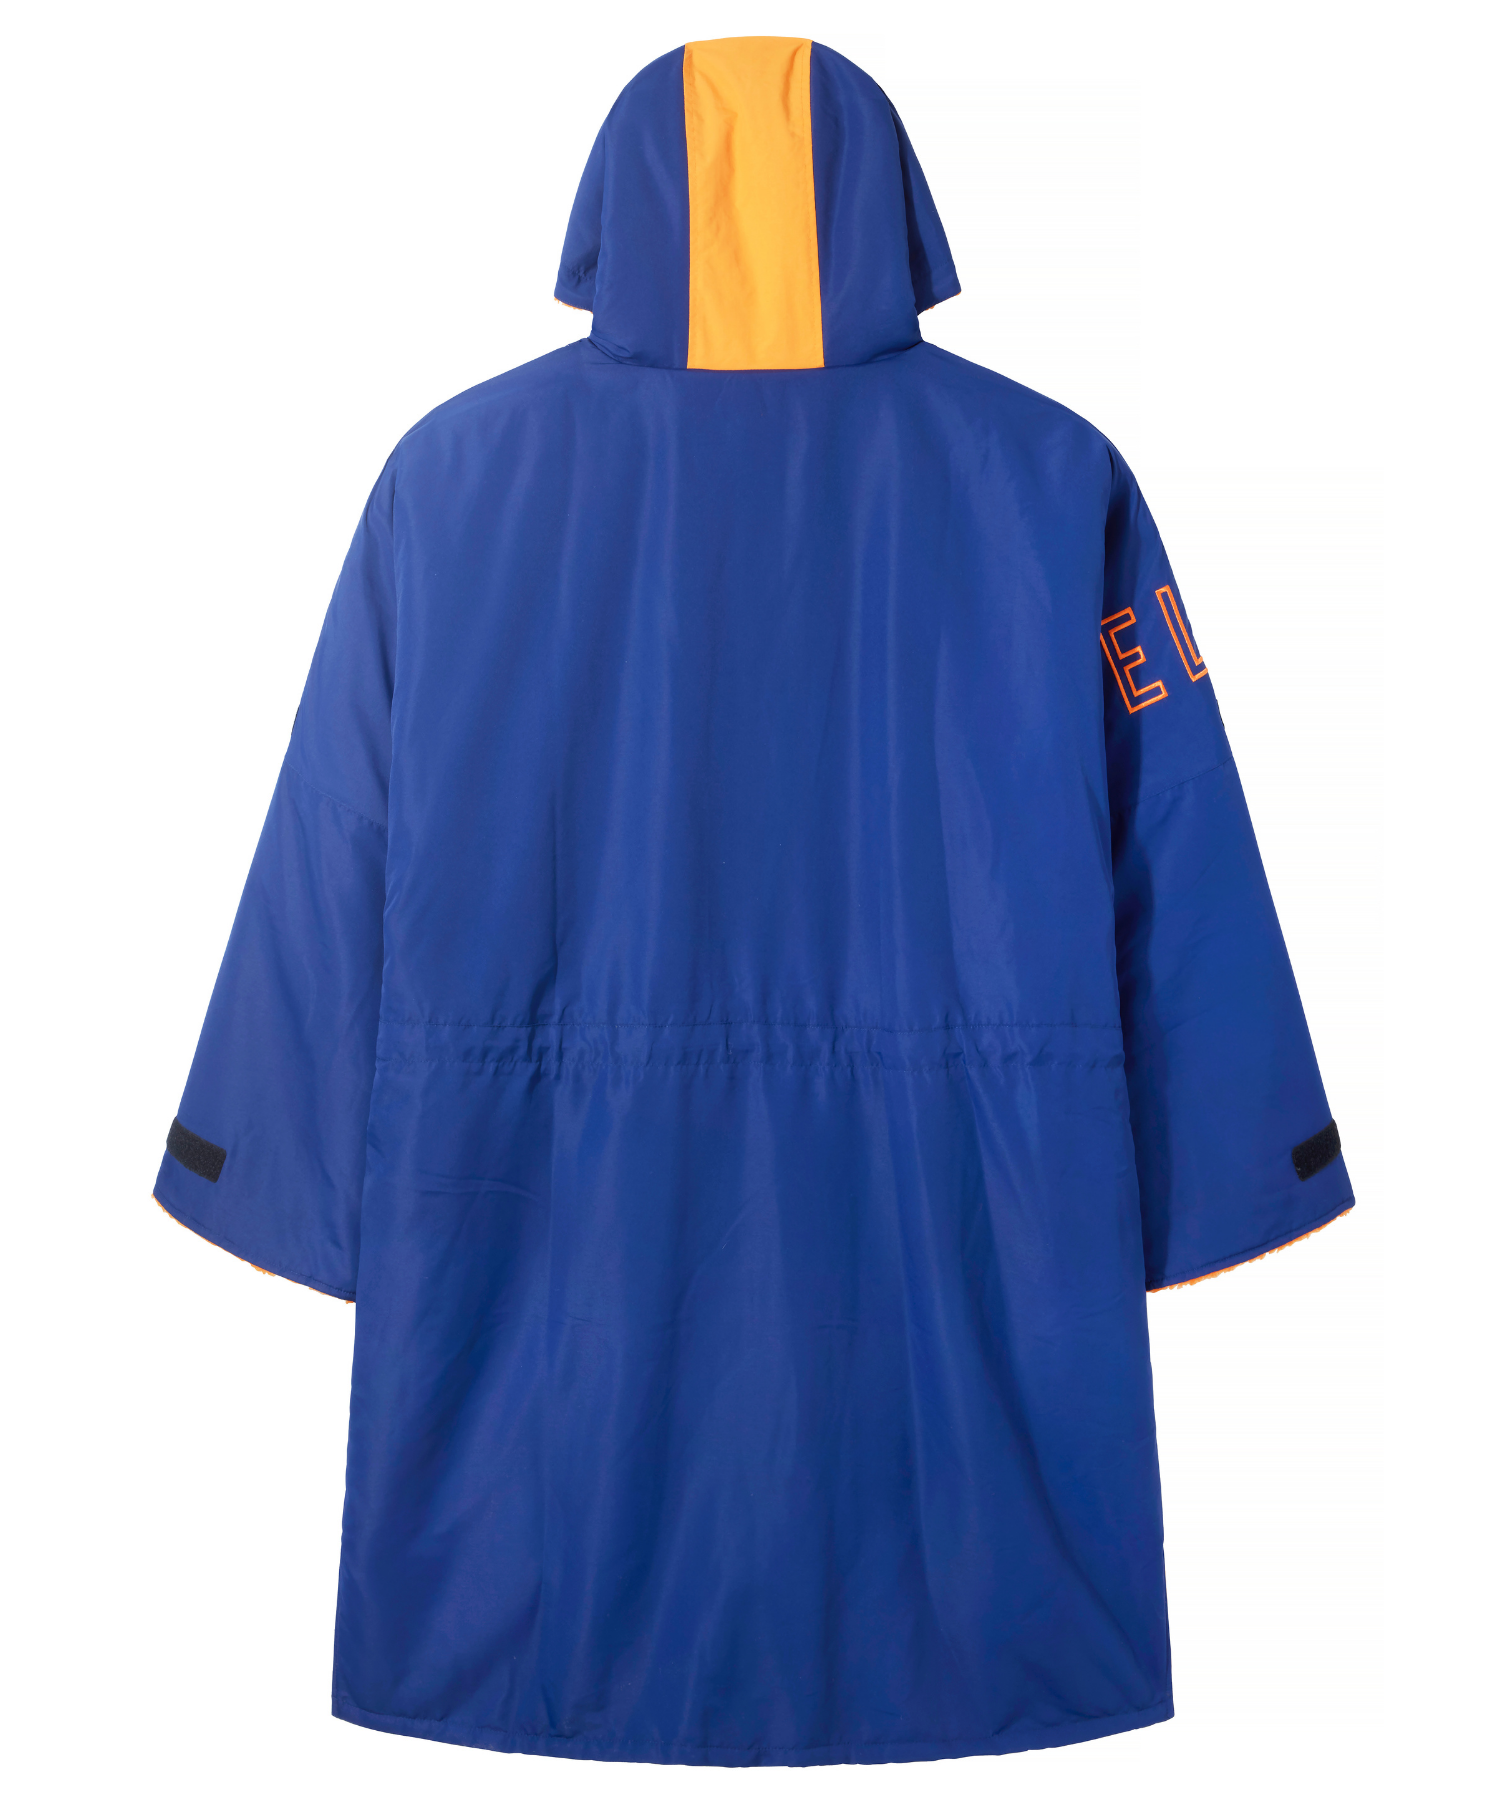 RECYCLED SELKIE ROBE DUAL BRANDED WITH HENLEY SWIM LOGO